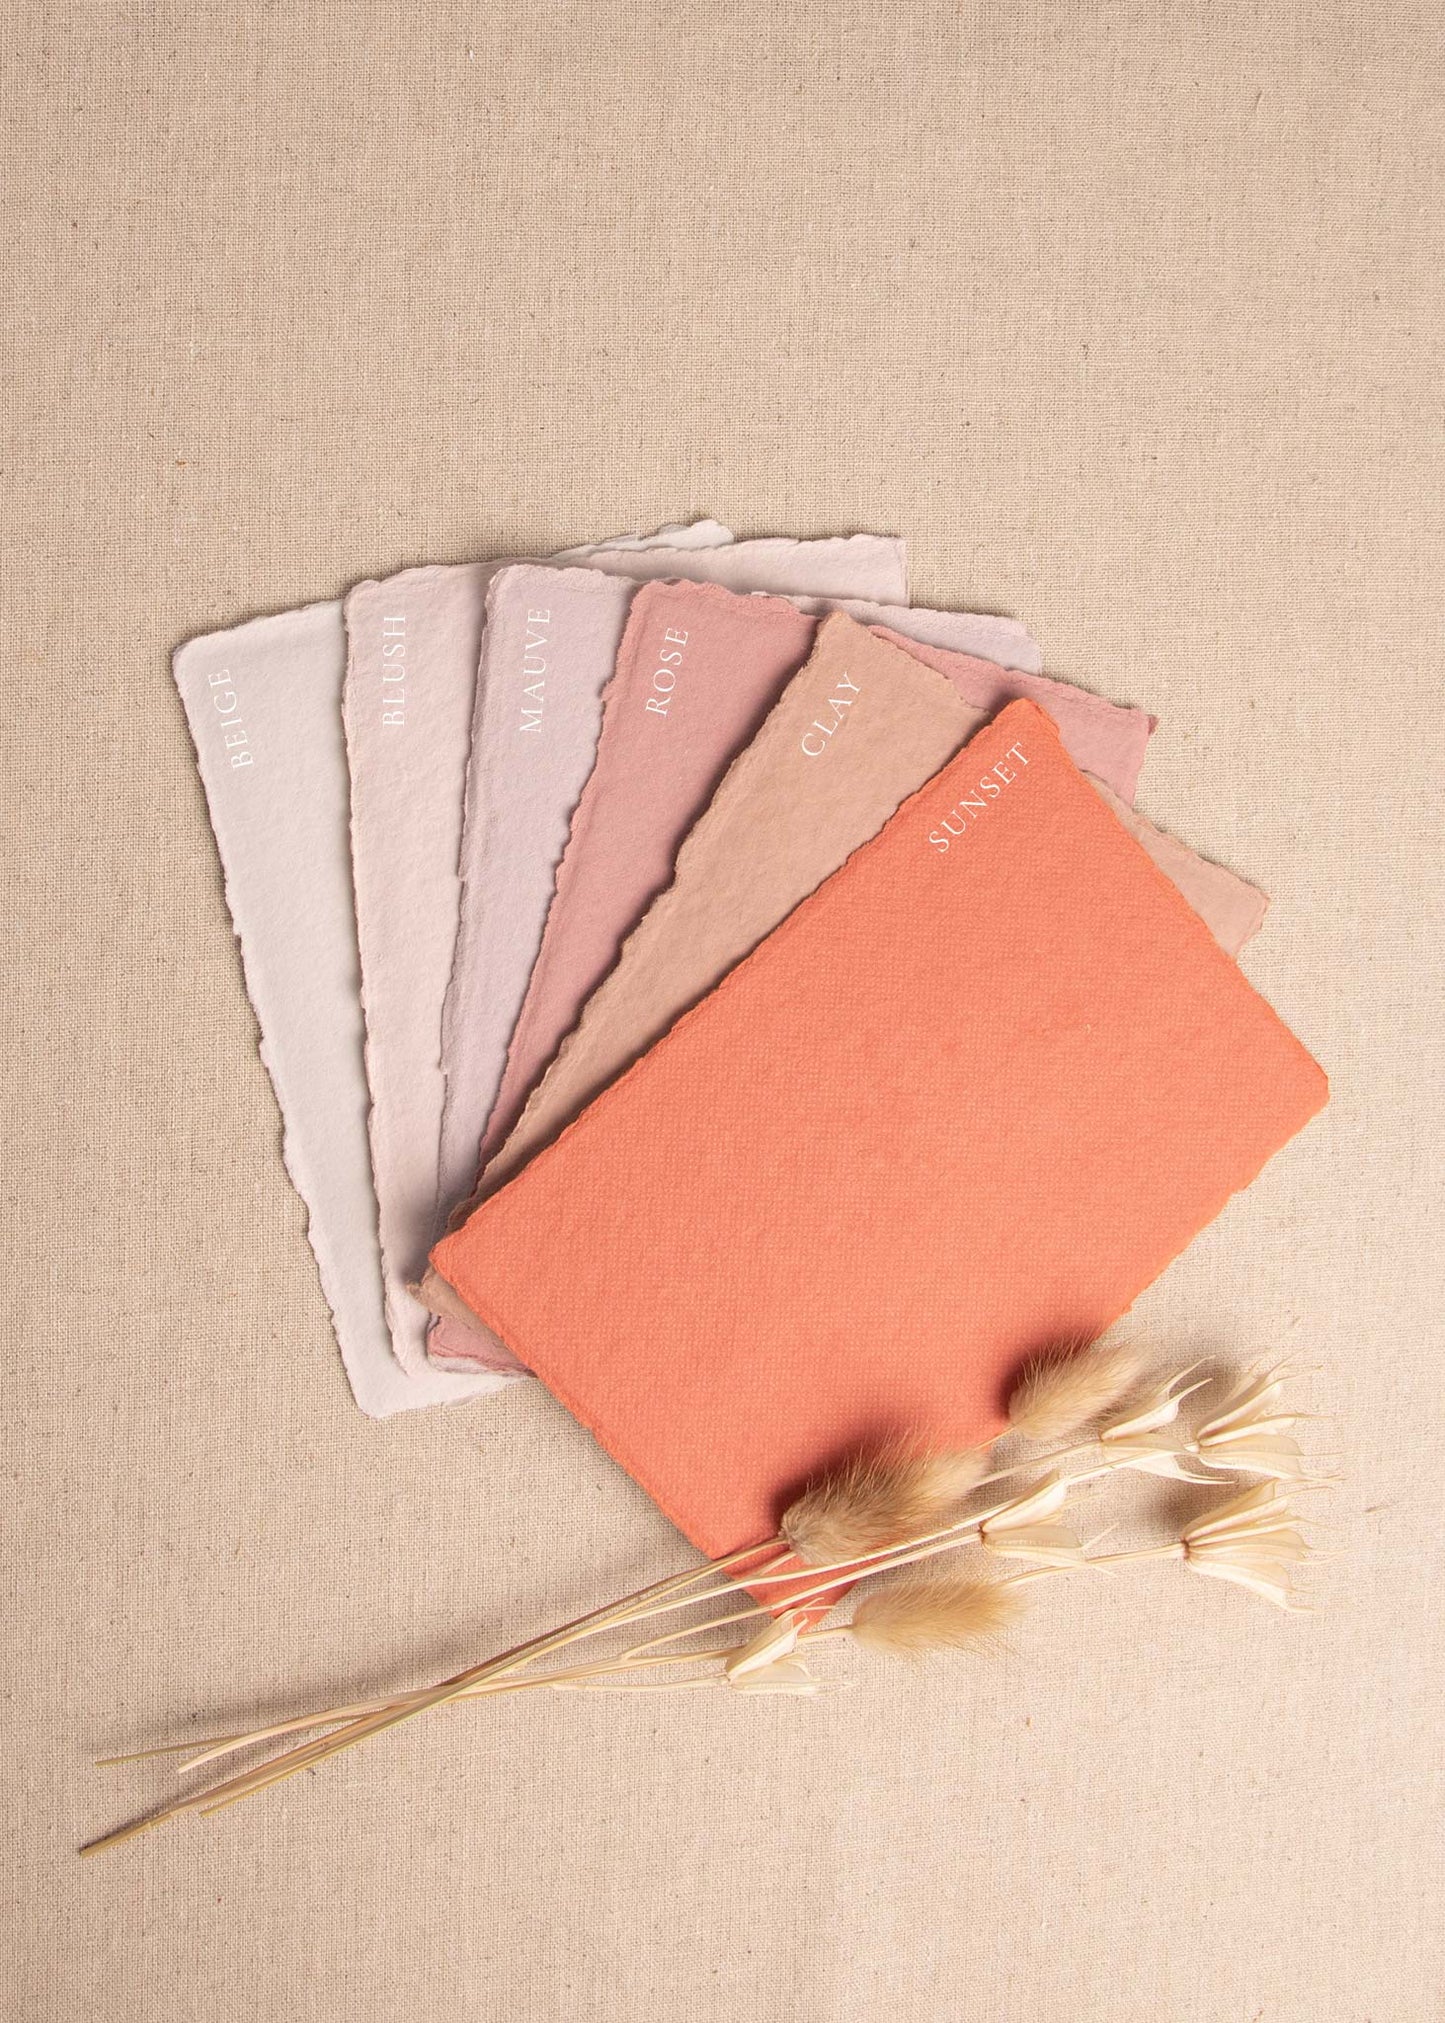 Fanned pile of Beige, Blush, Mauve, Rose, Clay, Sunset handmade paper sheets with deckle edge surrounded by dried flowers